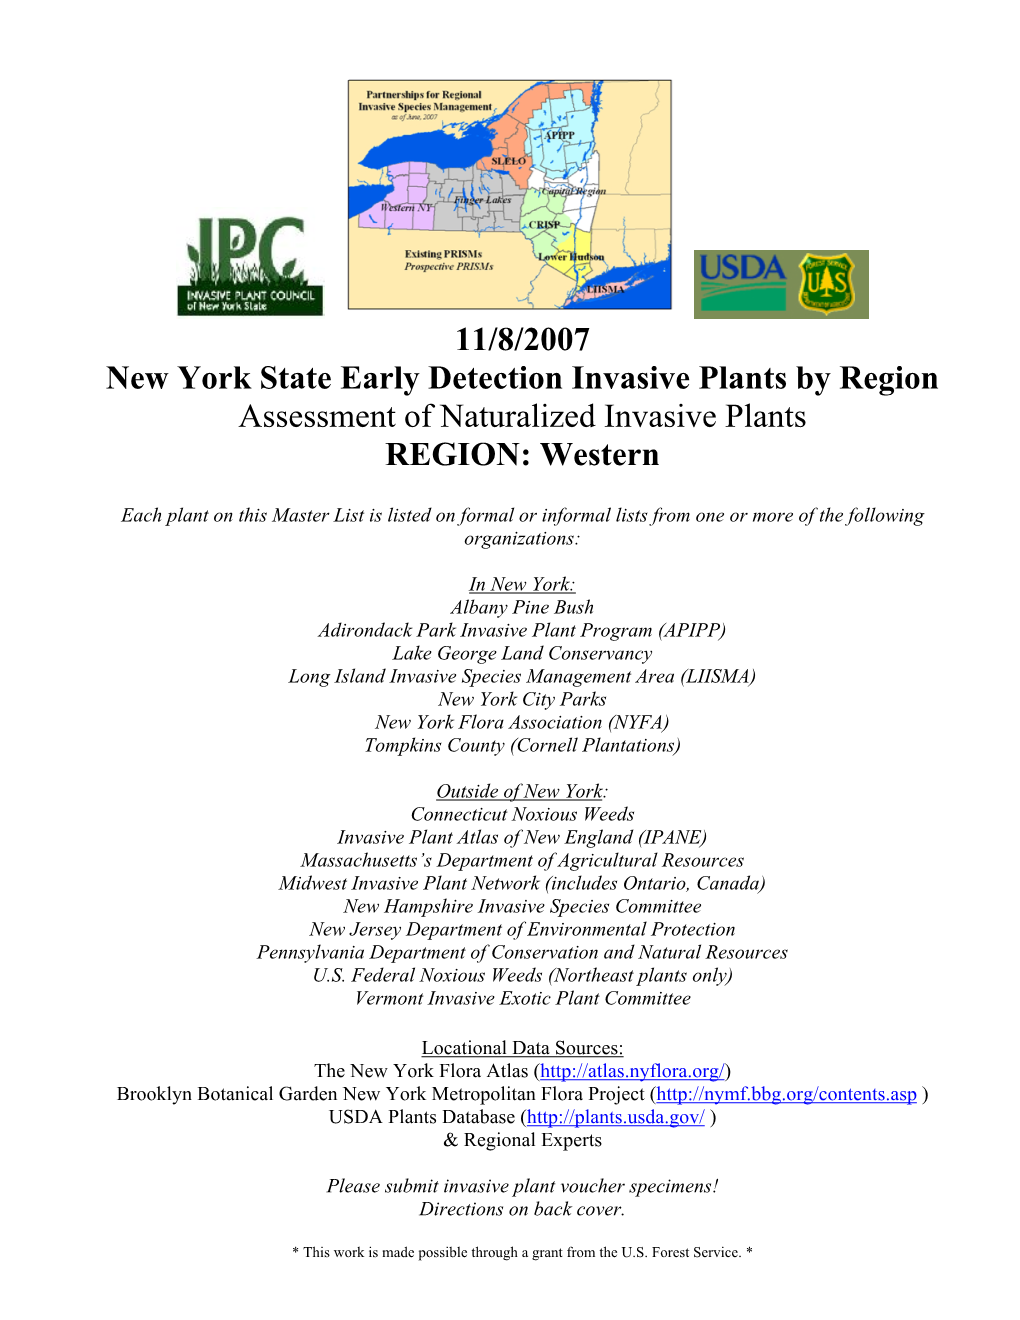 11/8/2007 New York State Early Detection Invasive Plants by Region Assessment of Naturalized Invasive Plants REGION: Western